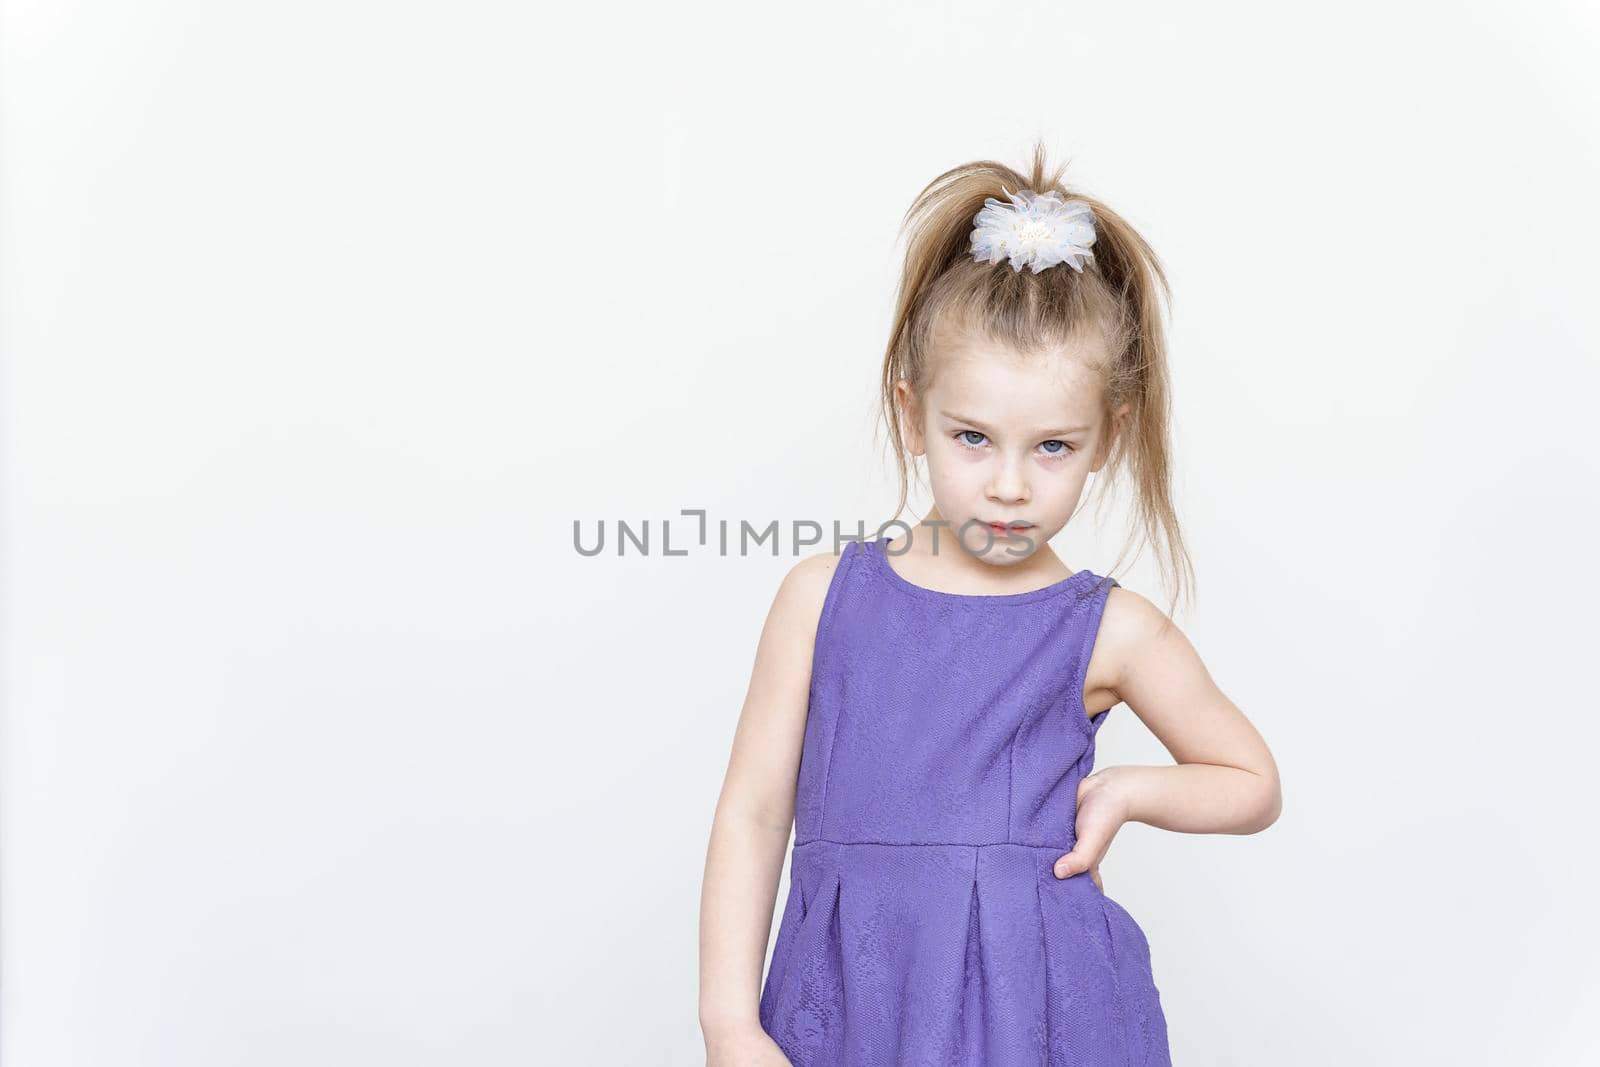 portrait of a cute 5 year old girl on a light background by Lena_Ogurtsova